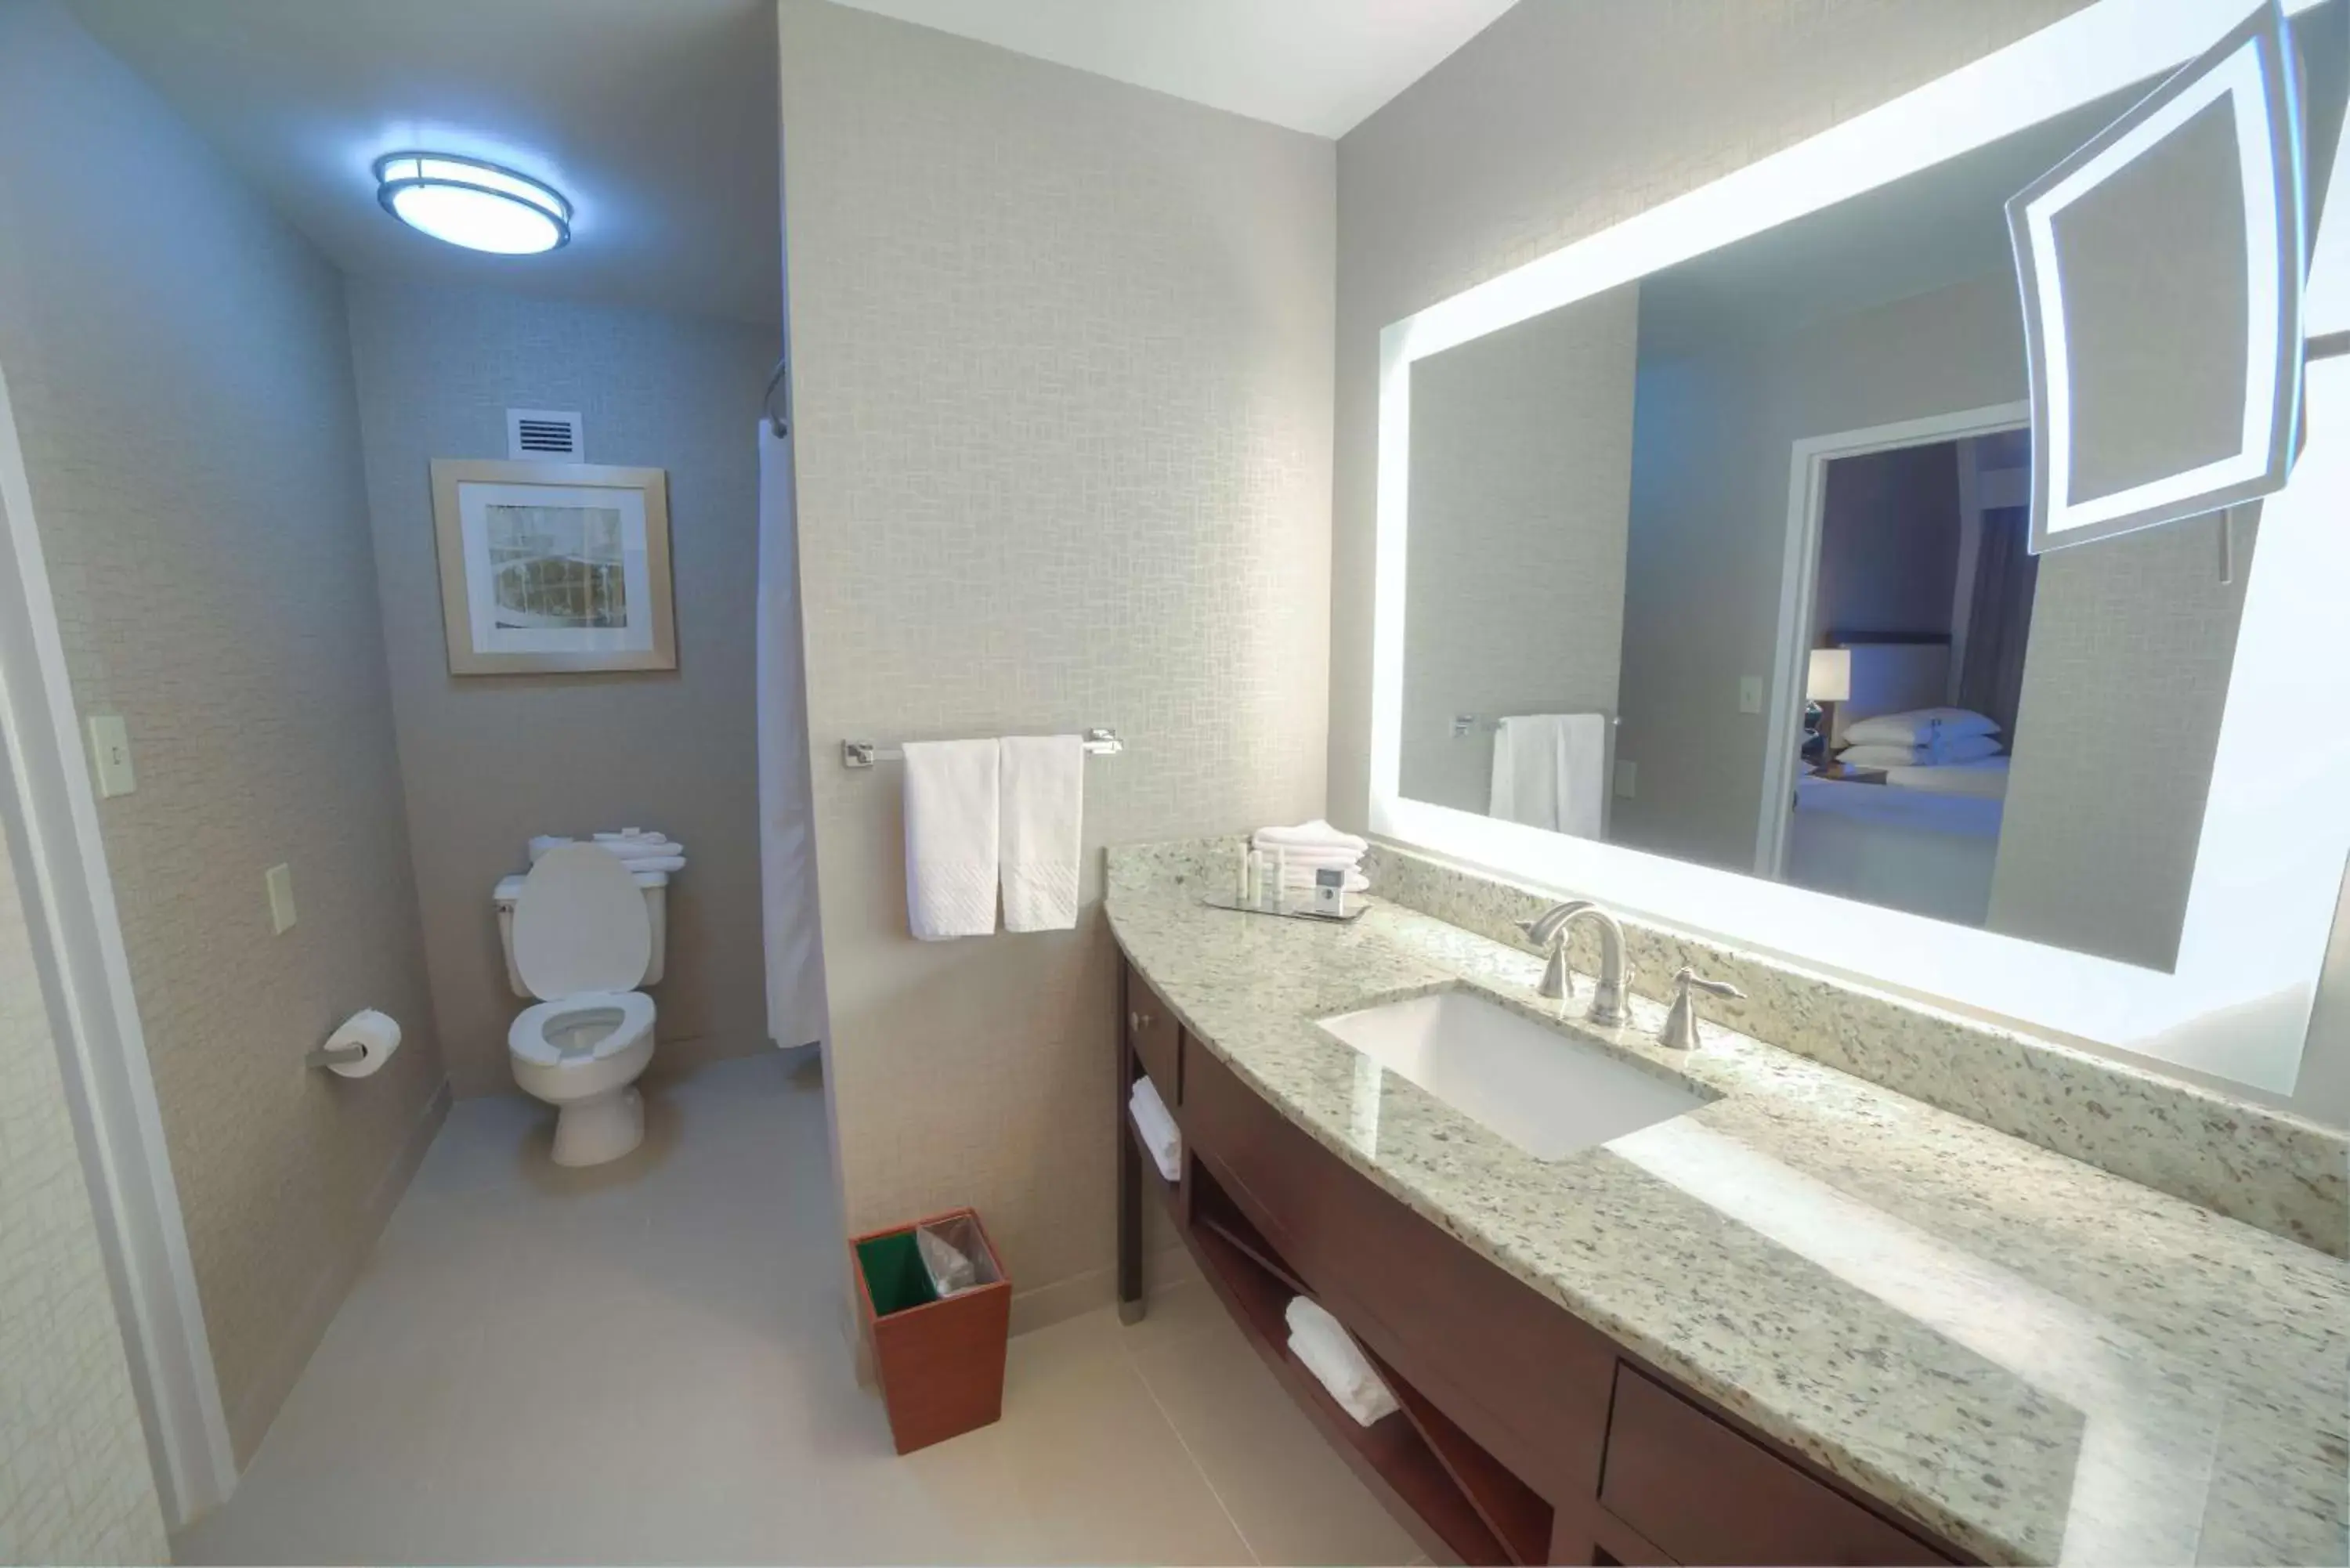 Bathroom in Doubletree Suites by Hilton at The Battery Atlanta